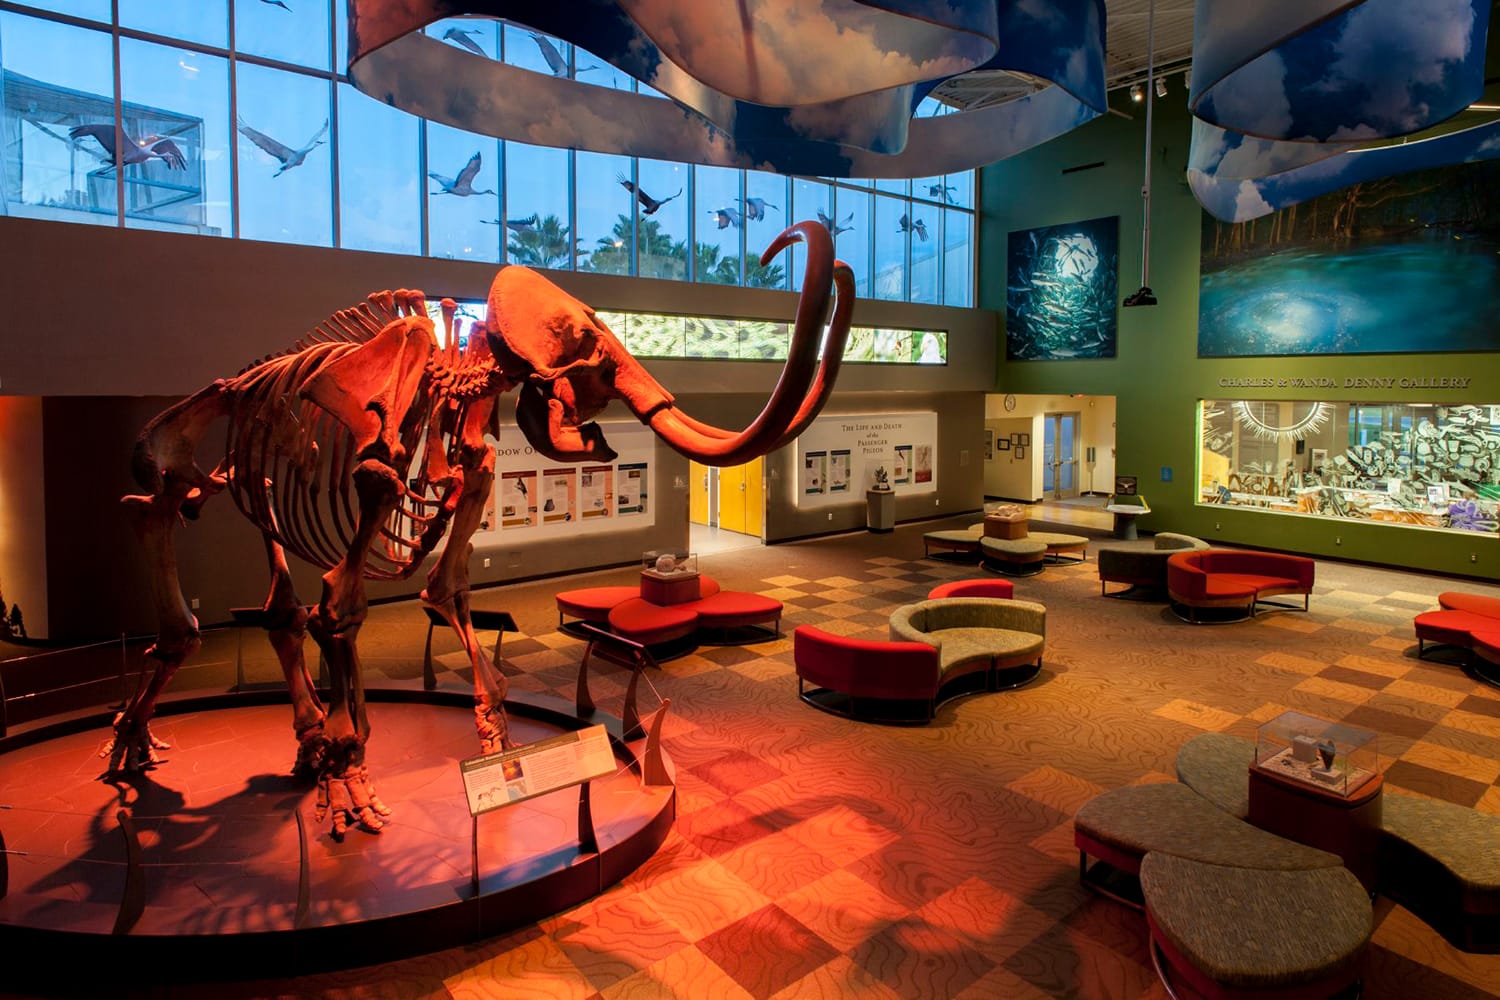 Florida Museum of Natural History in Gainesville, Florida, USA